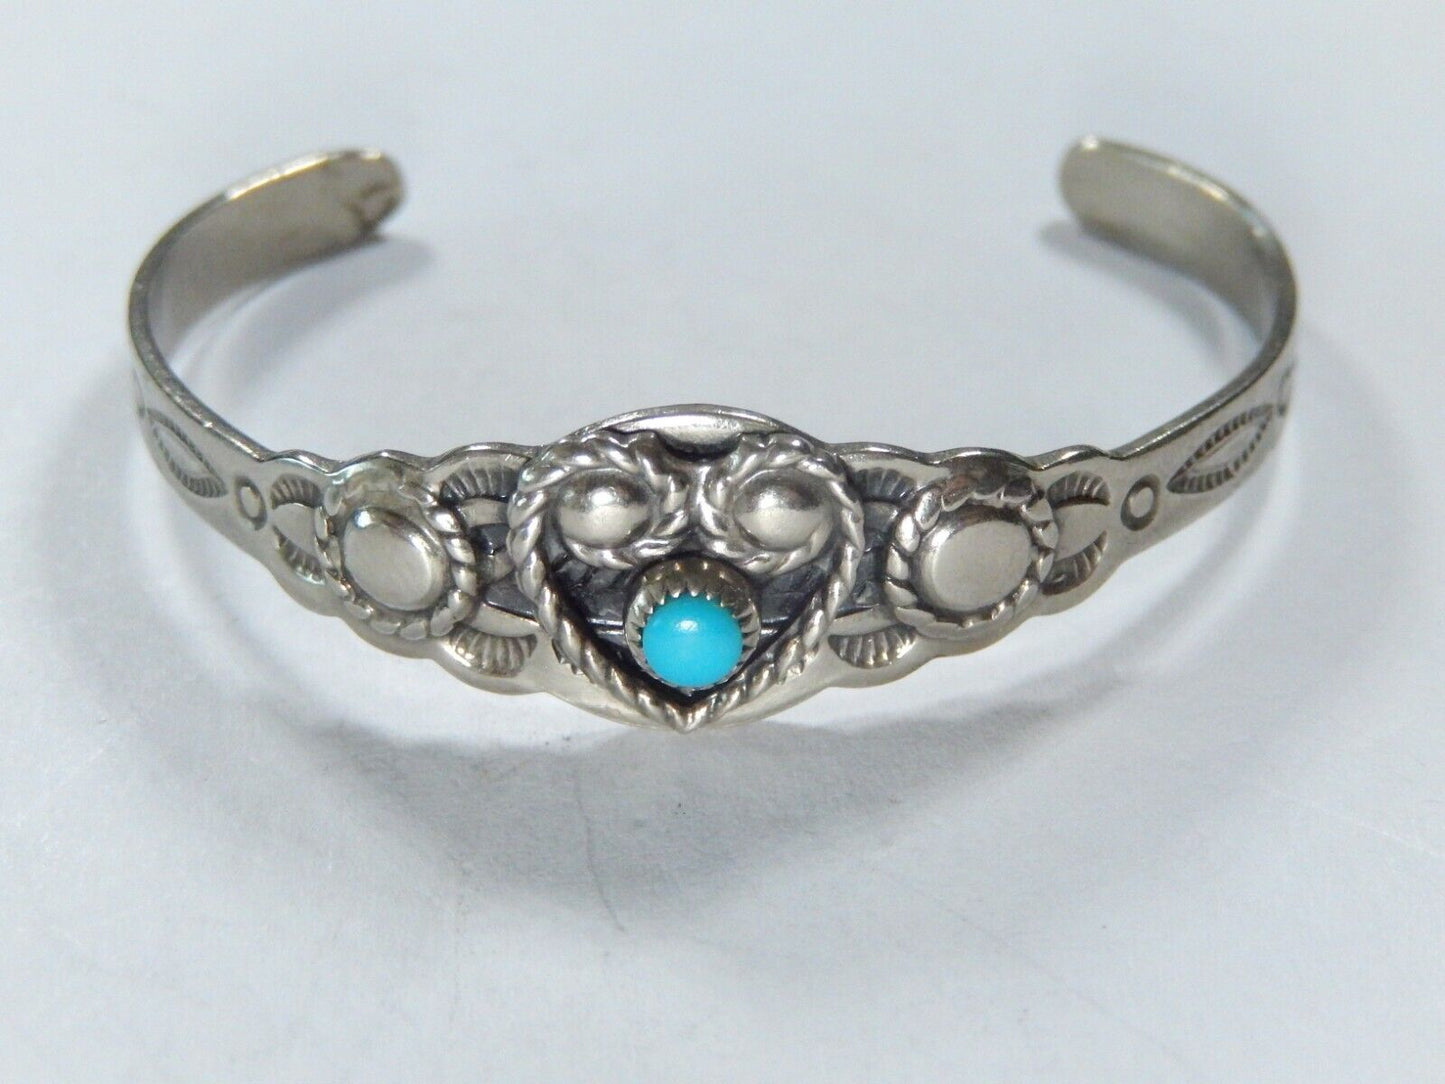 *VINTAGE* Small Vintage Childs Bell Nickel Silver & Turquoise Cuff Bracelet